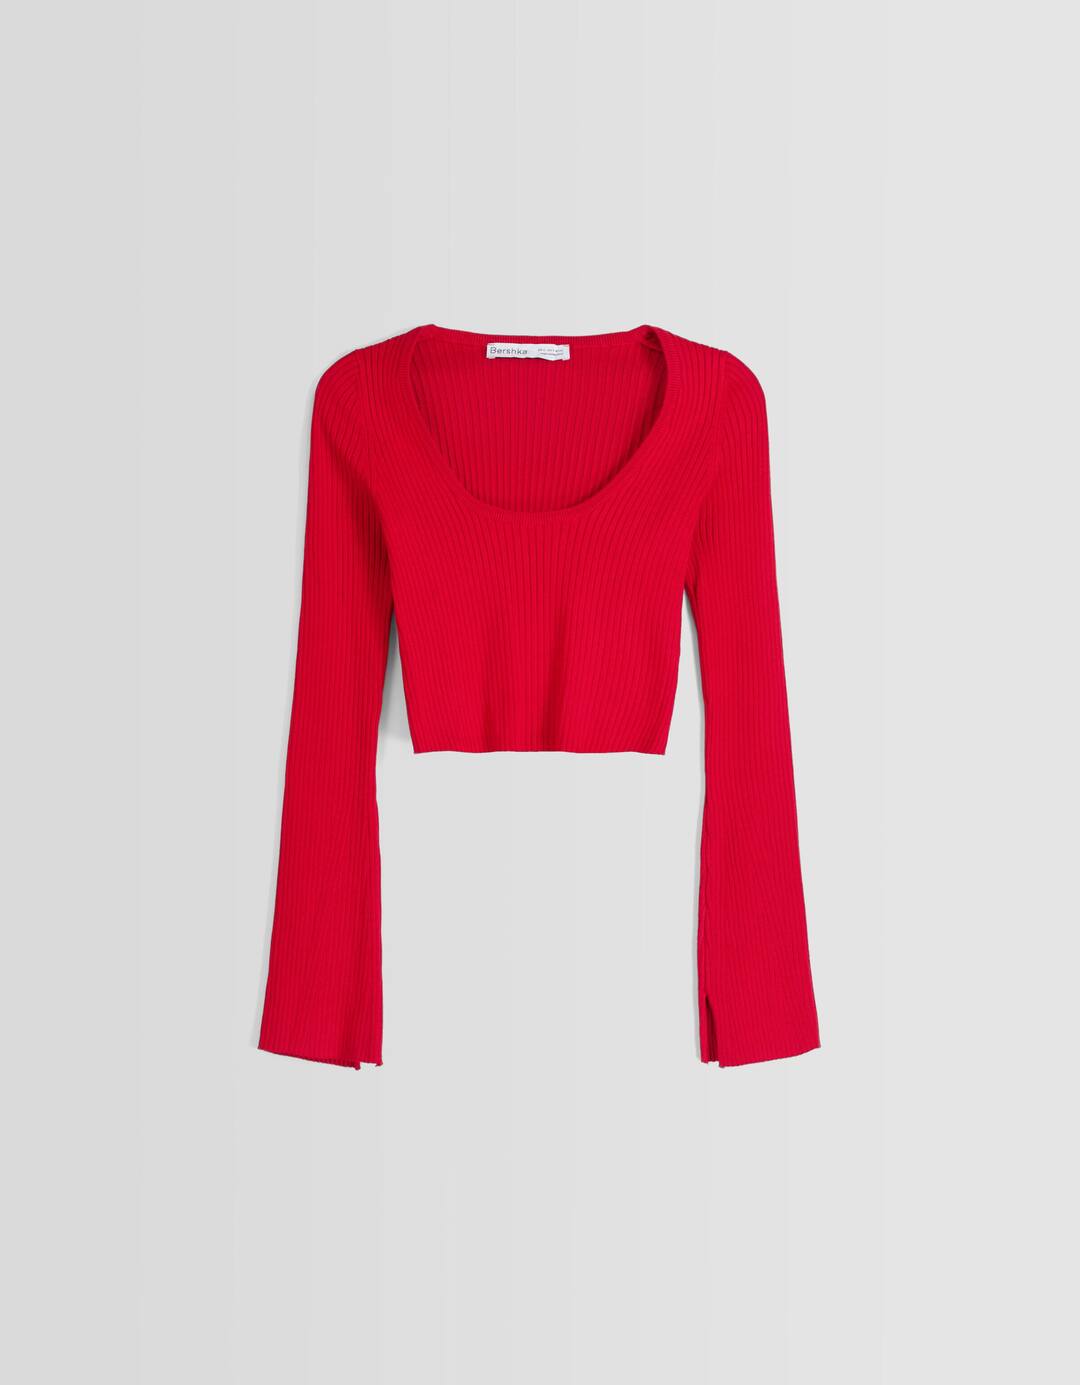 Ribbed knit sweater with neckline